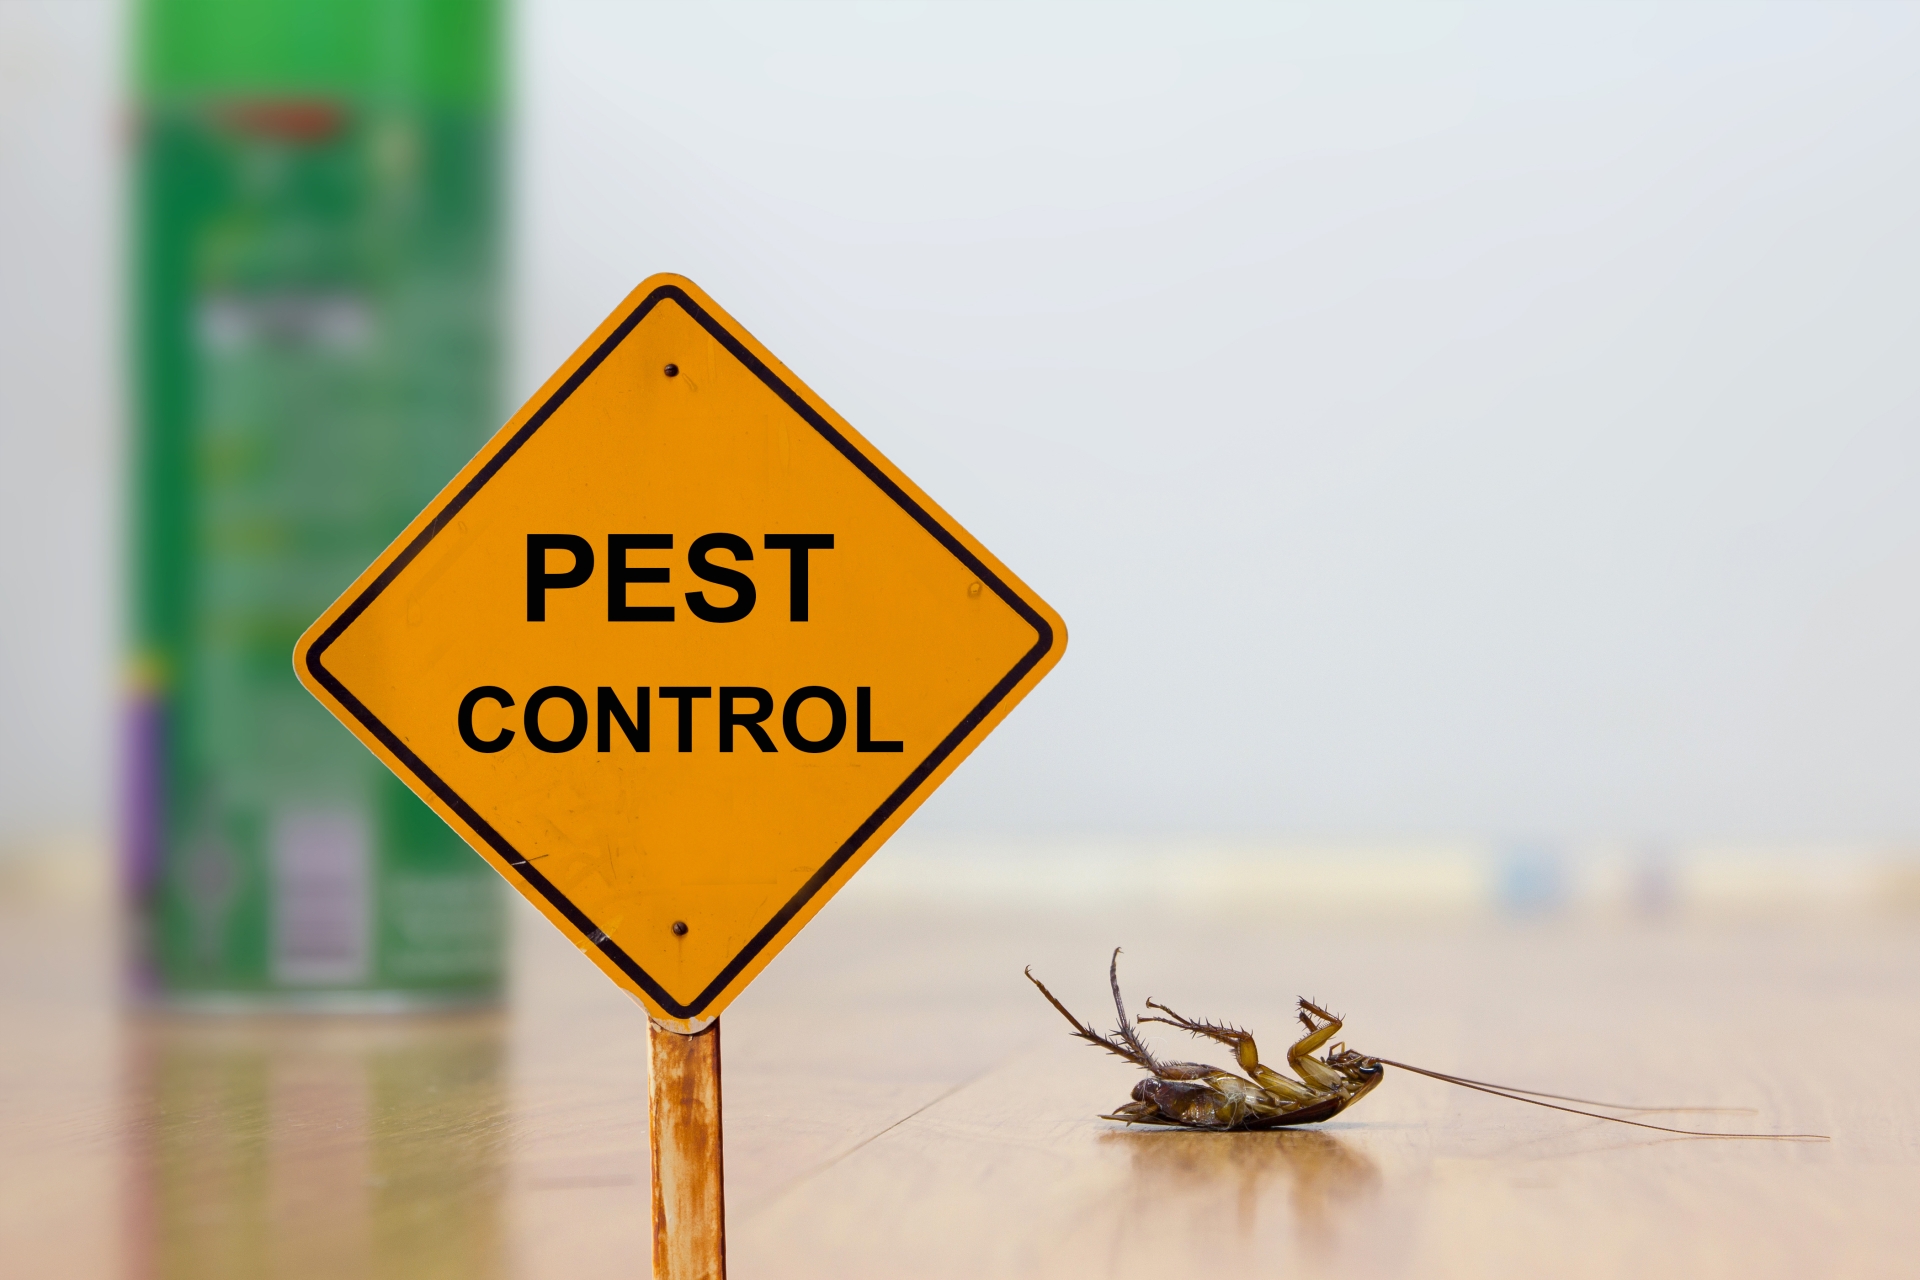 24 Hour Pest Control, Pest Control in South Norwood, SE25. Call Now 020 8166 9746